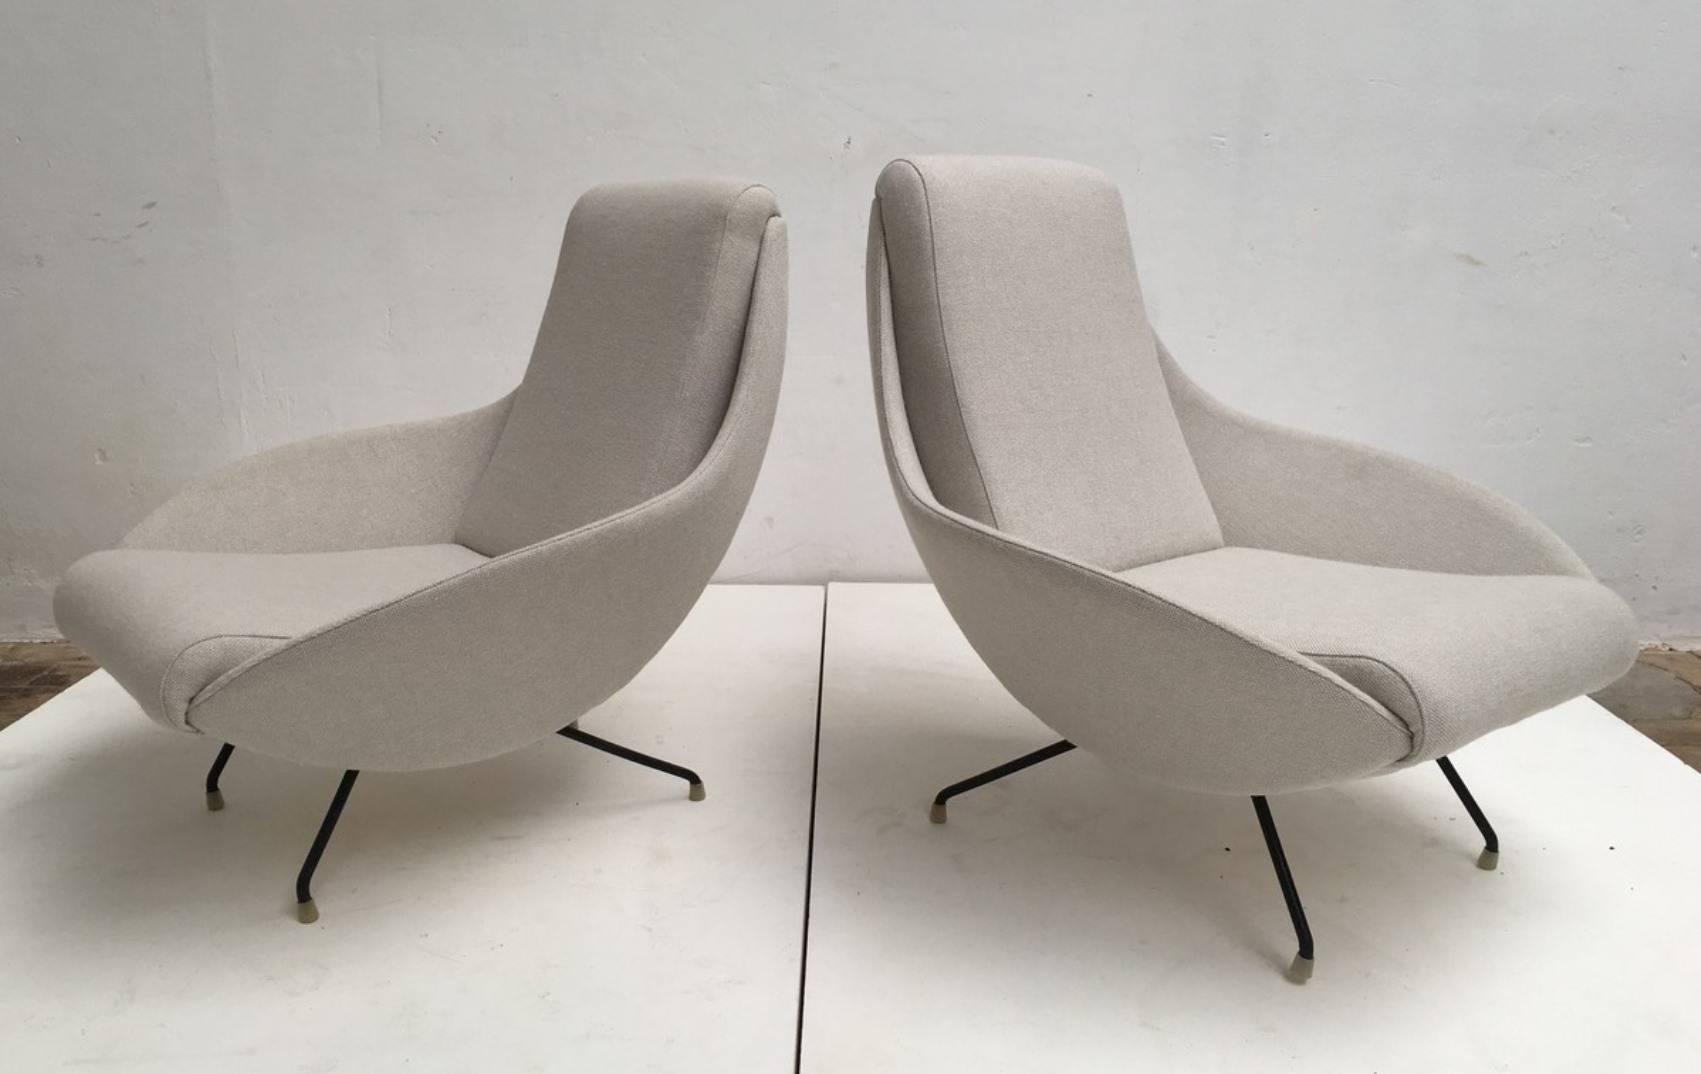 Mid-20th Century Beautiful Restored Italian Sculptural Mantis Form Lounge Chairs, 1950-1955